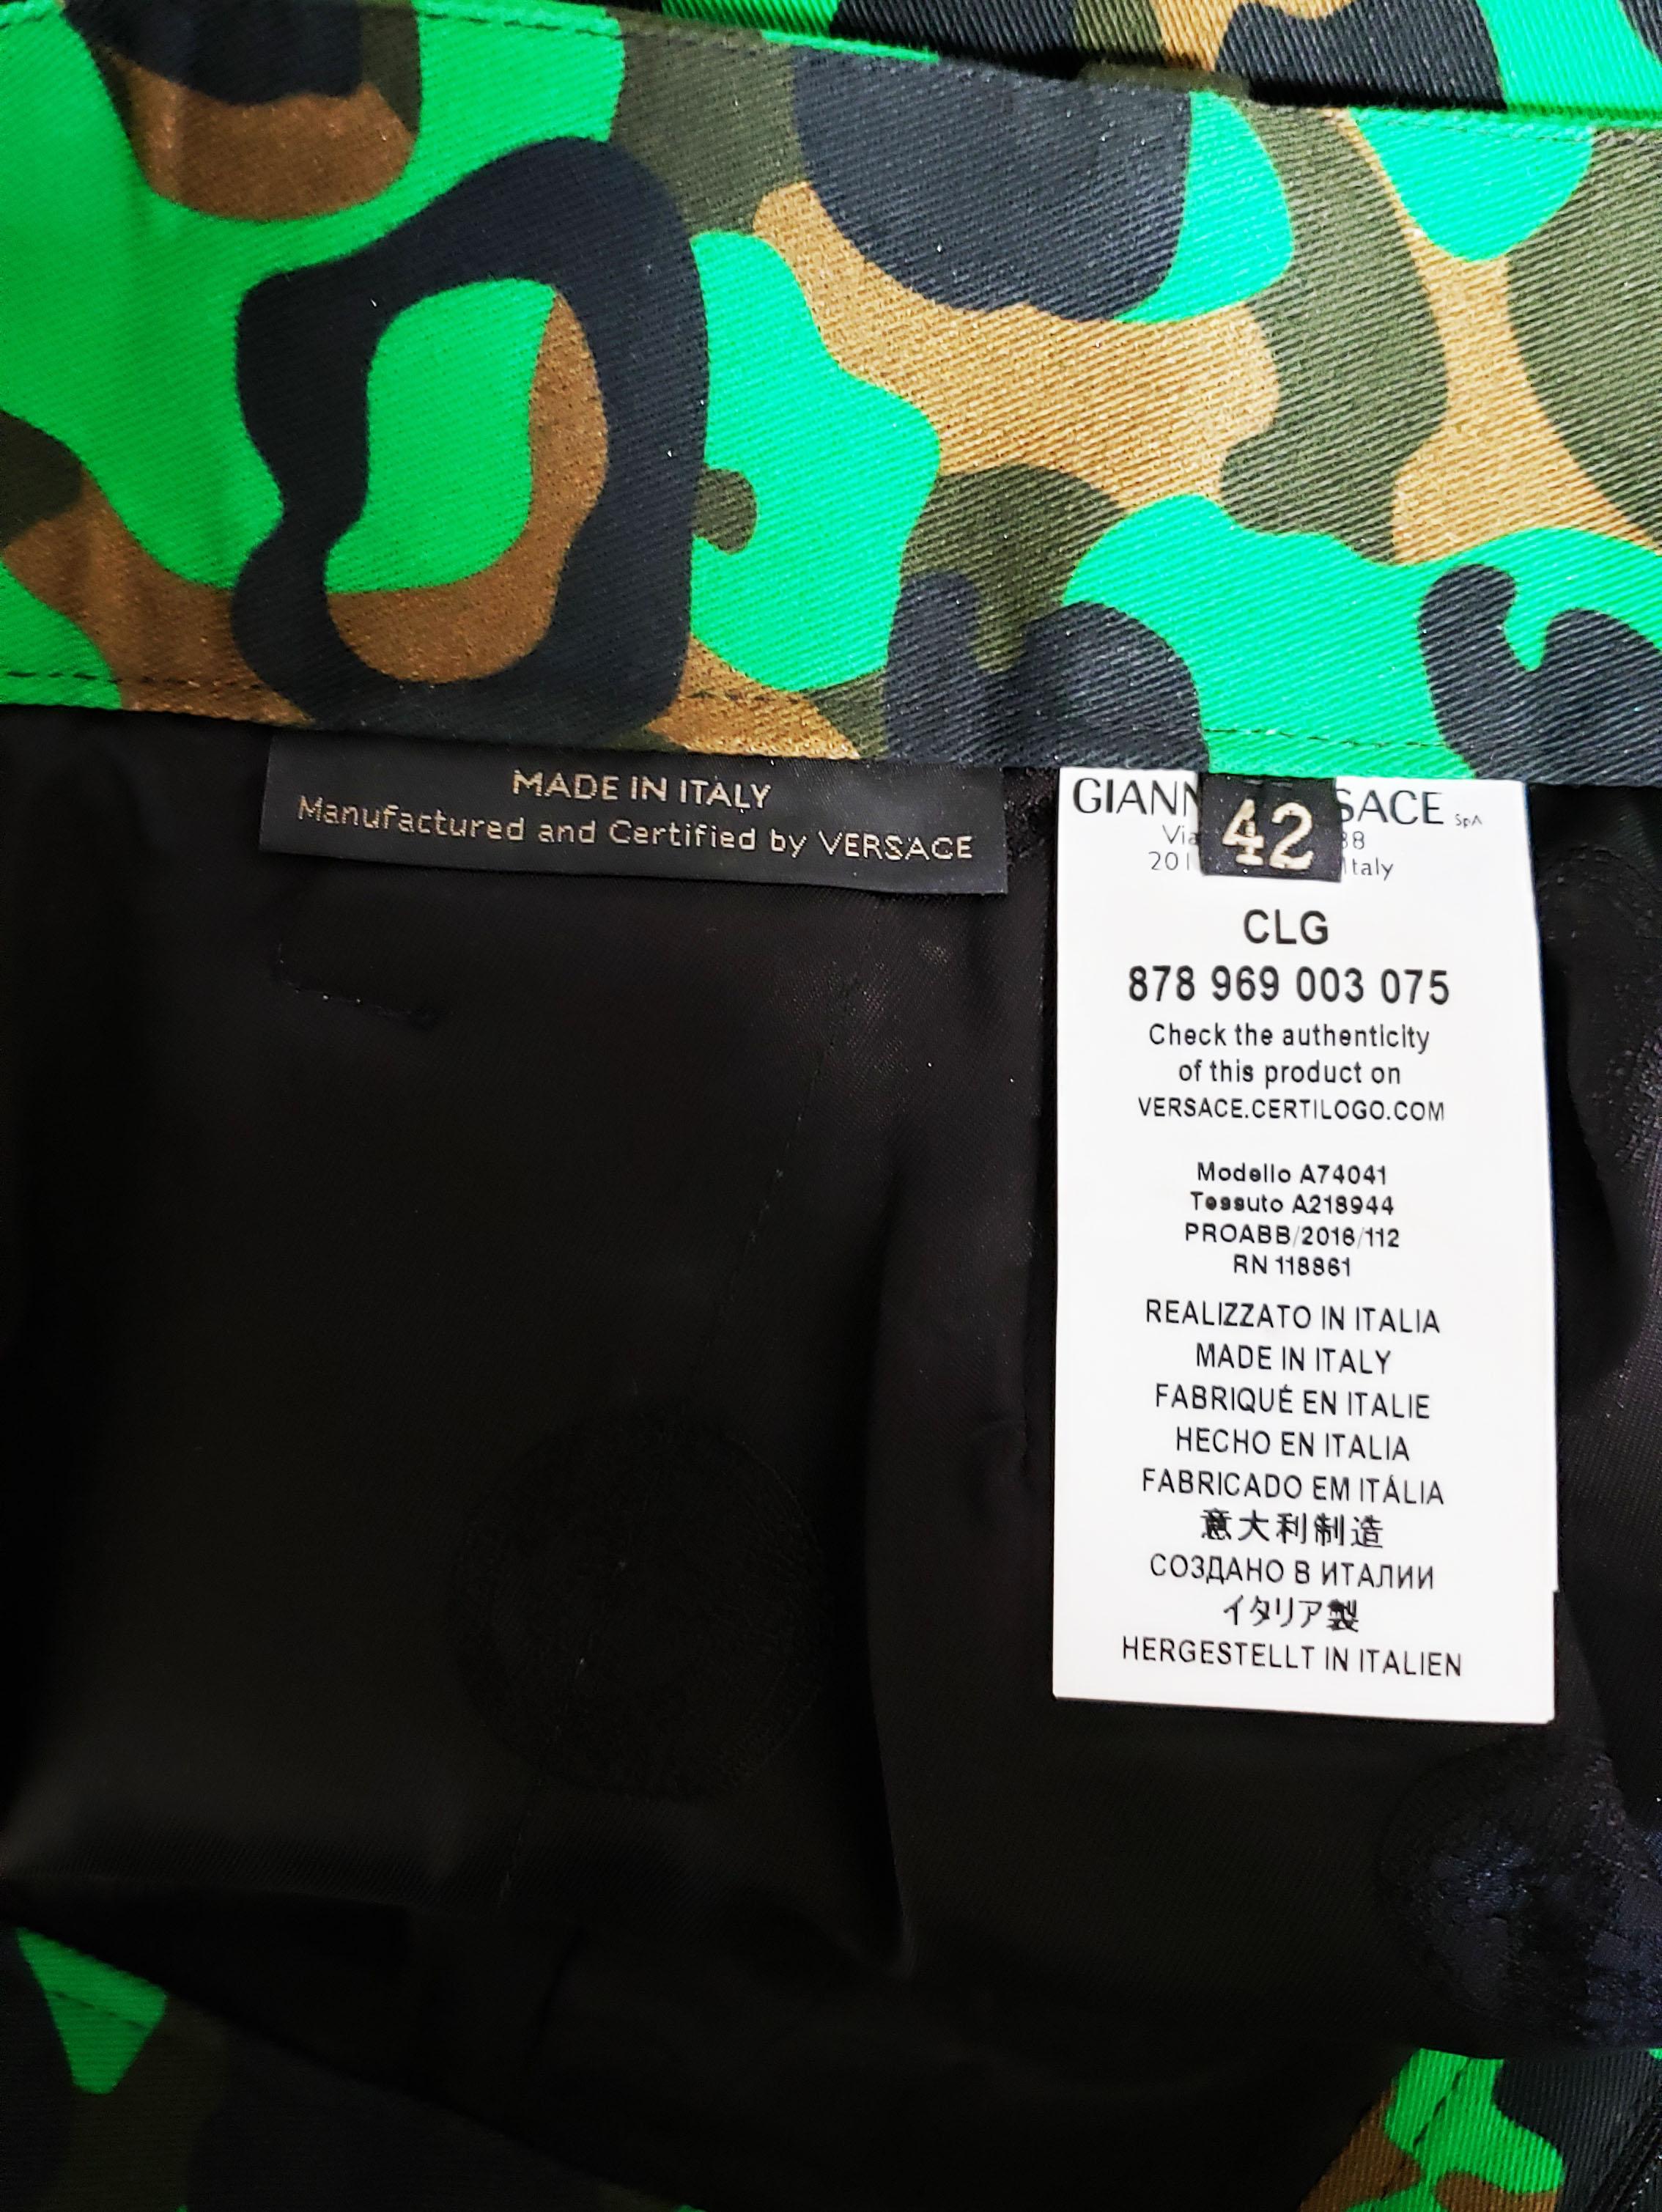 S/S 2016 Look # 12 NEW VERSACE MILITARY CAMOUFLAGE PRINTED SHORTS 42 - 6 For Sale 4